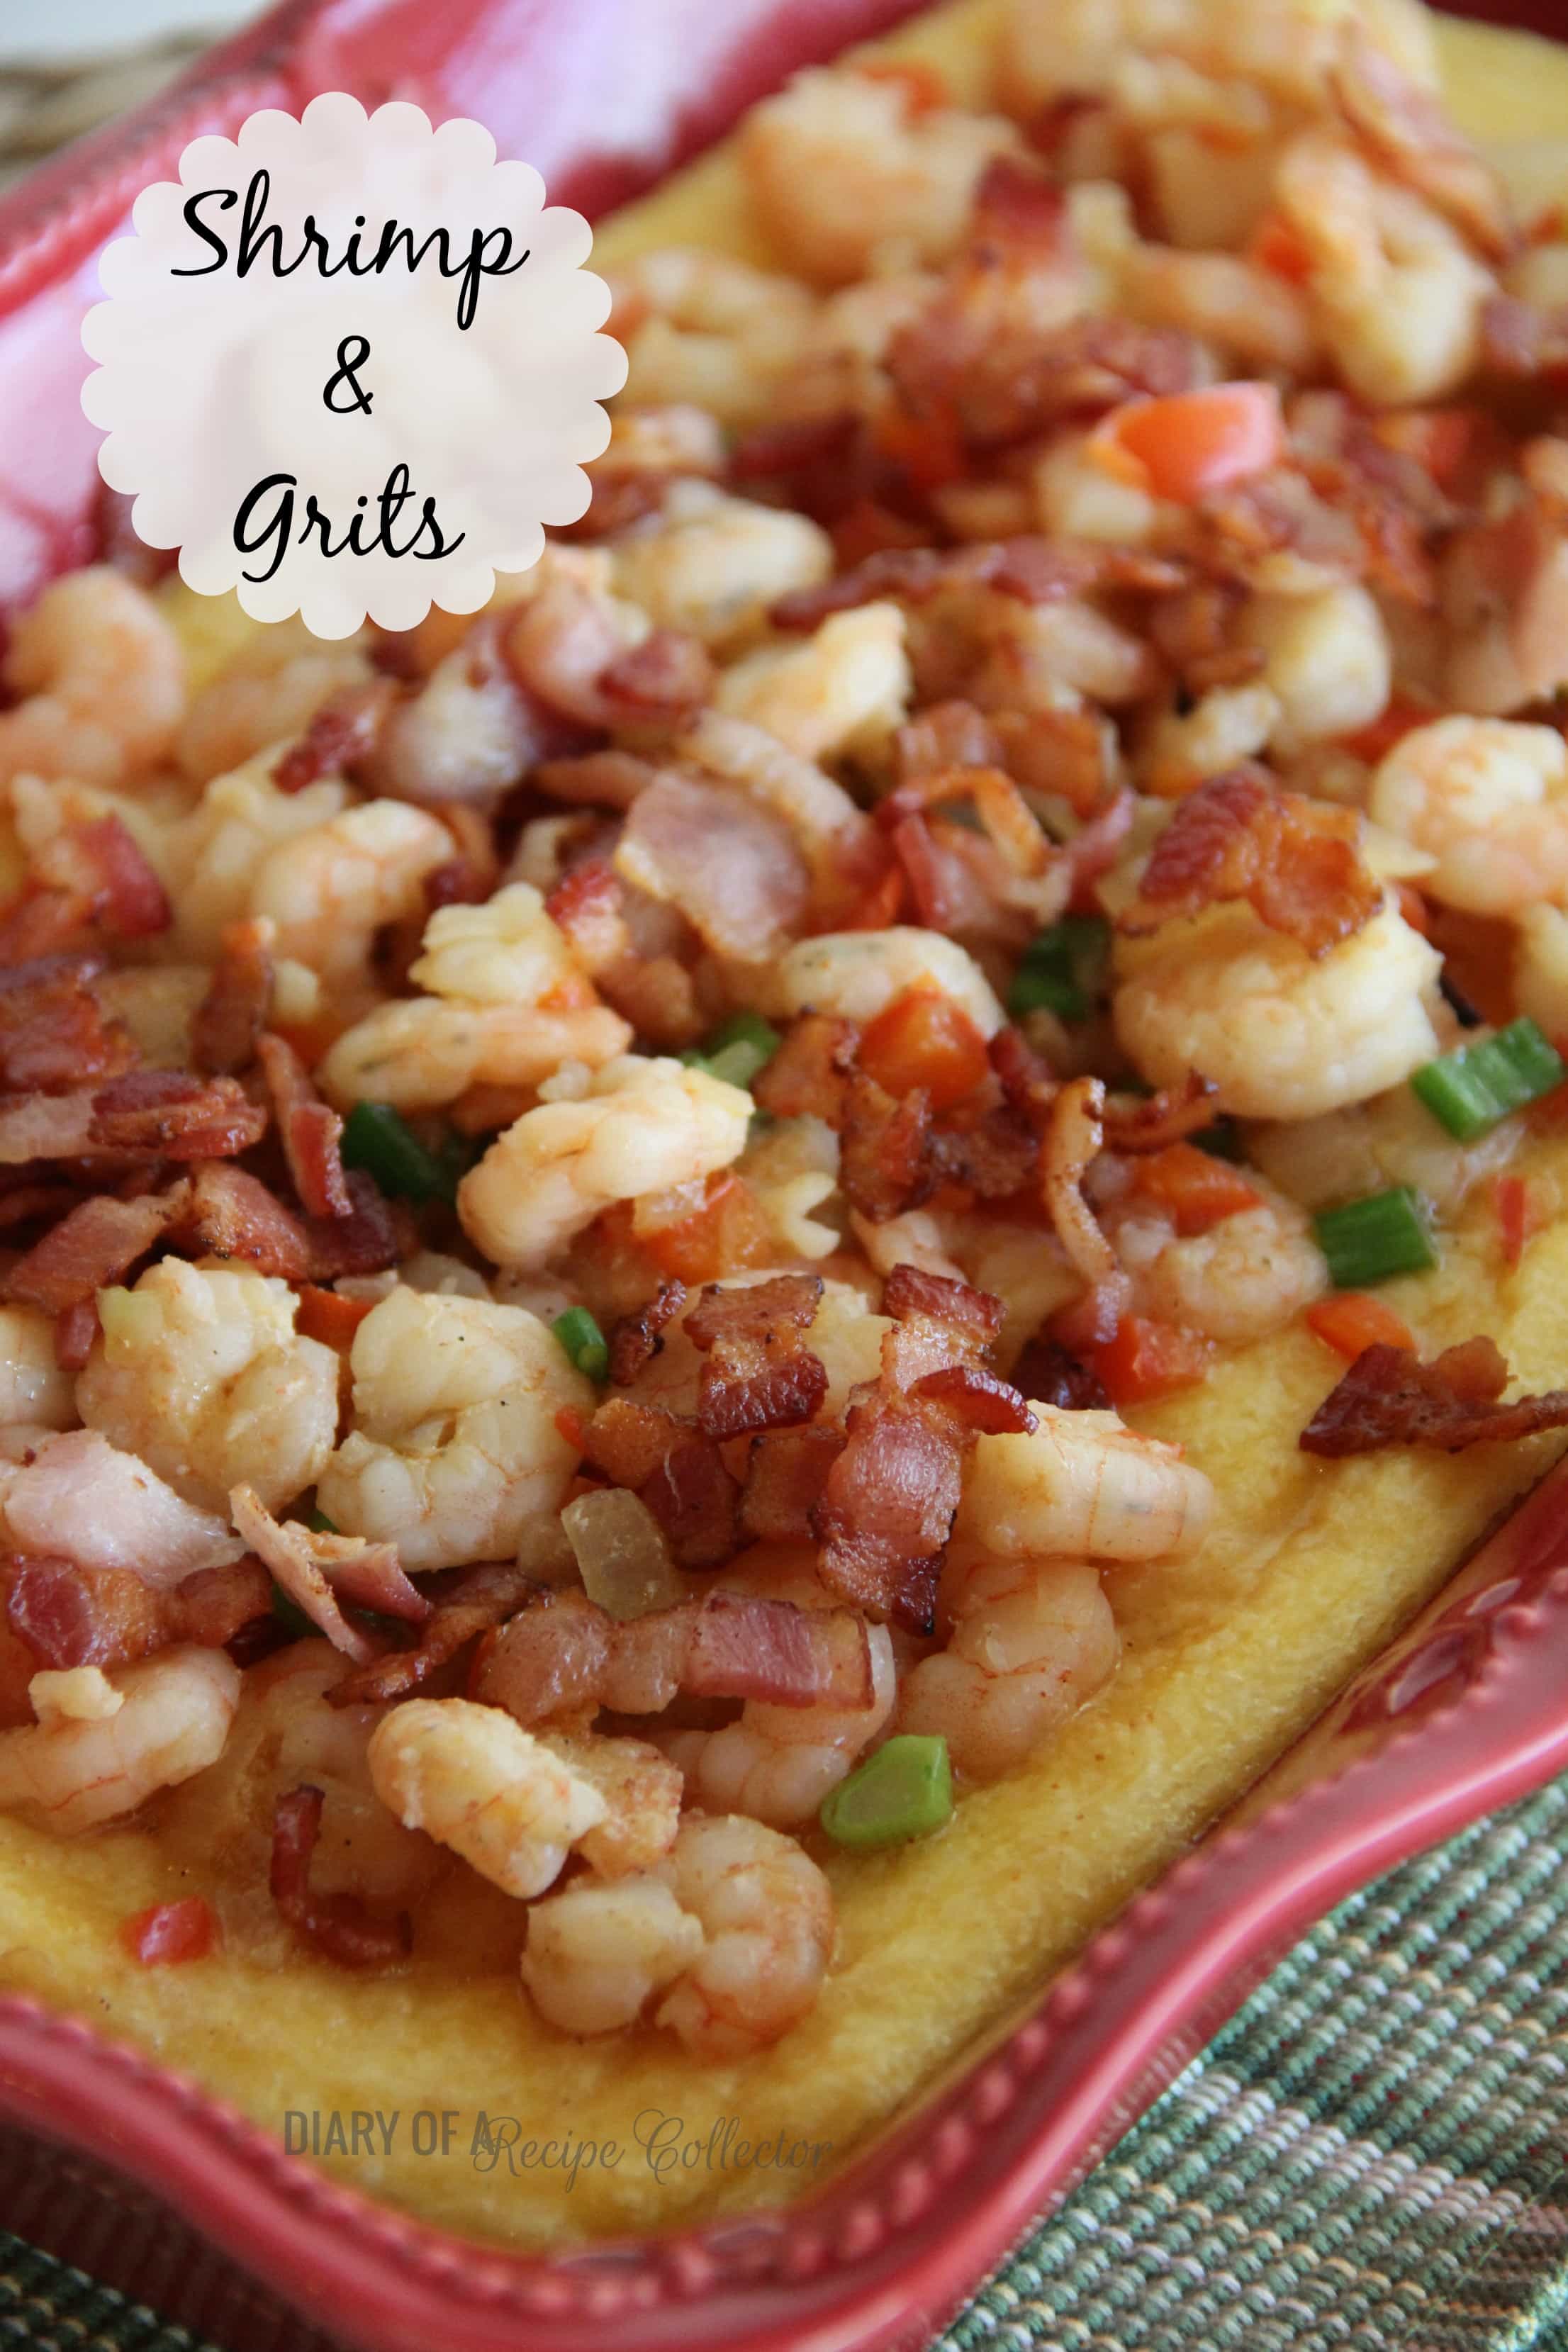 Shrimp & Grits - Diary of A Recipe Collector